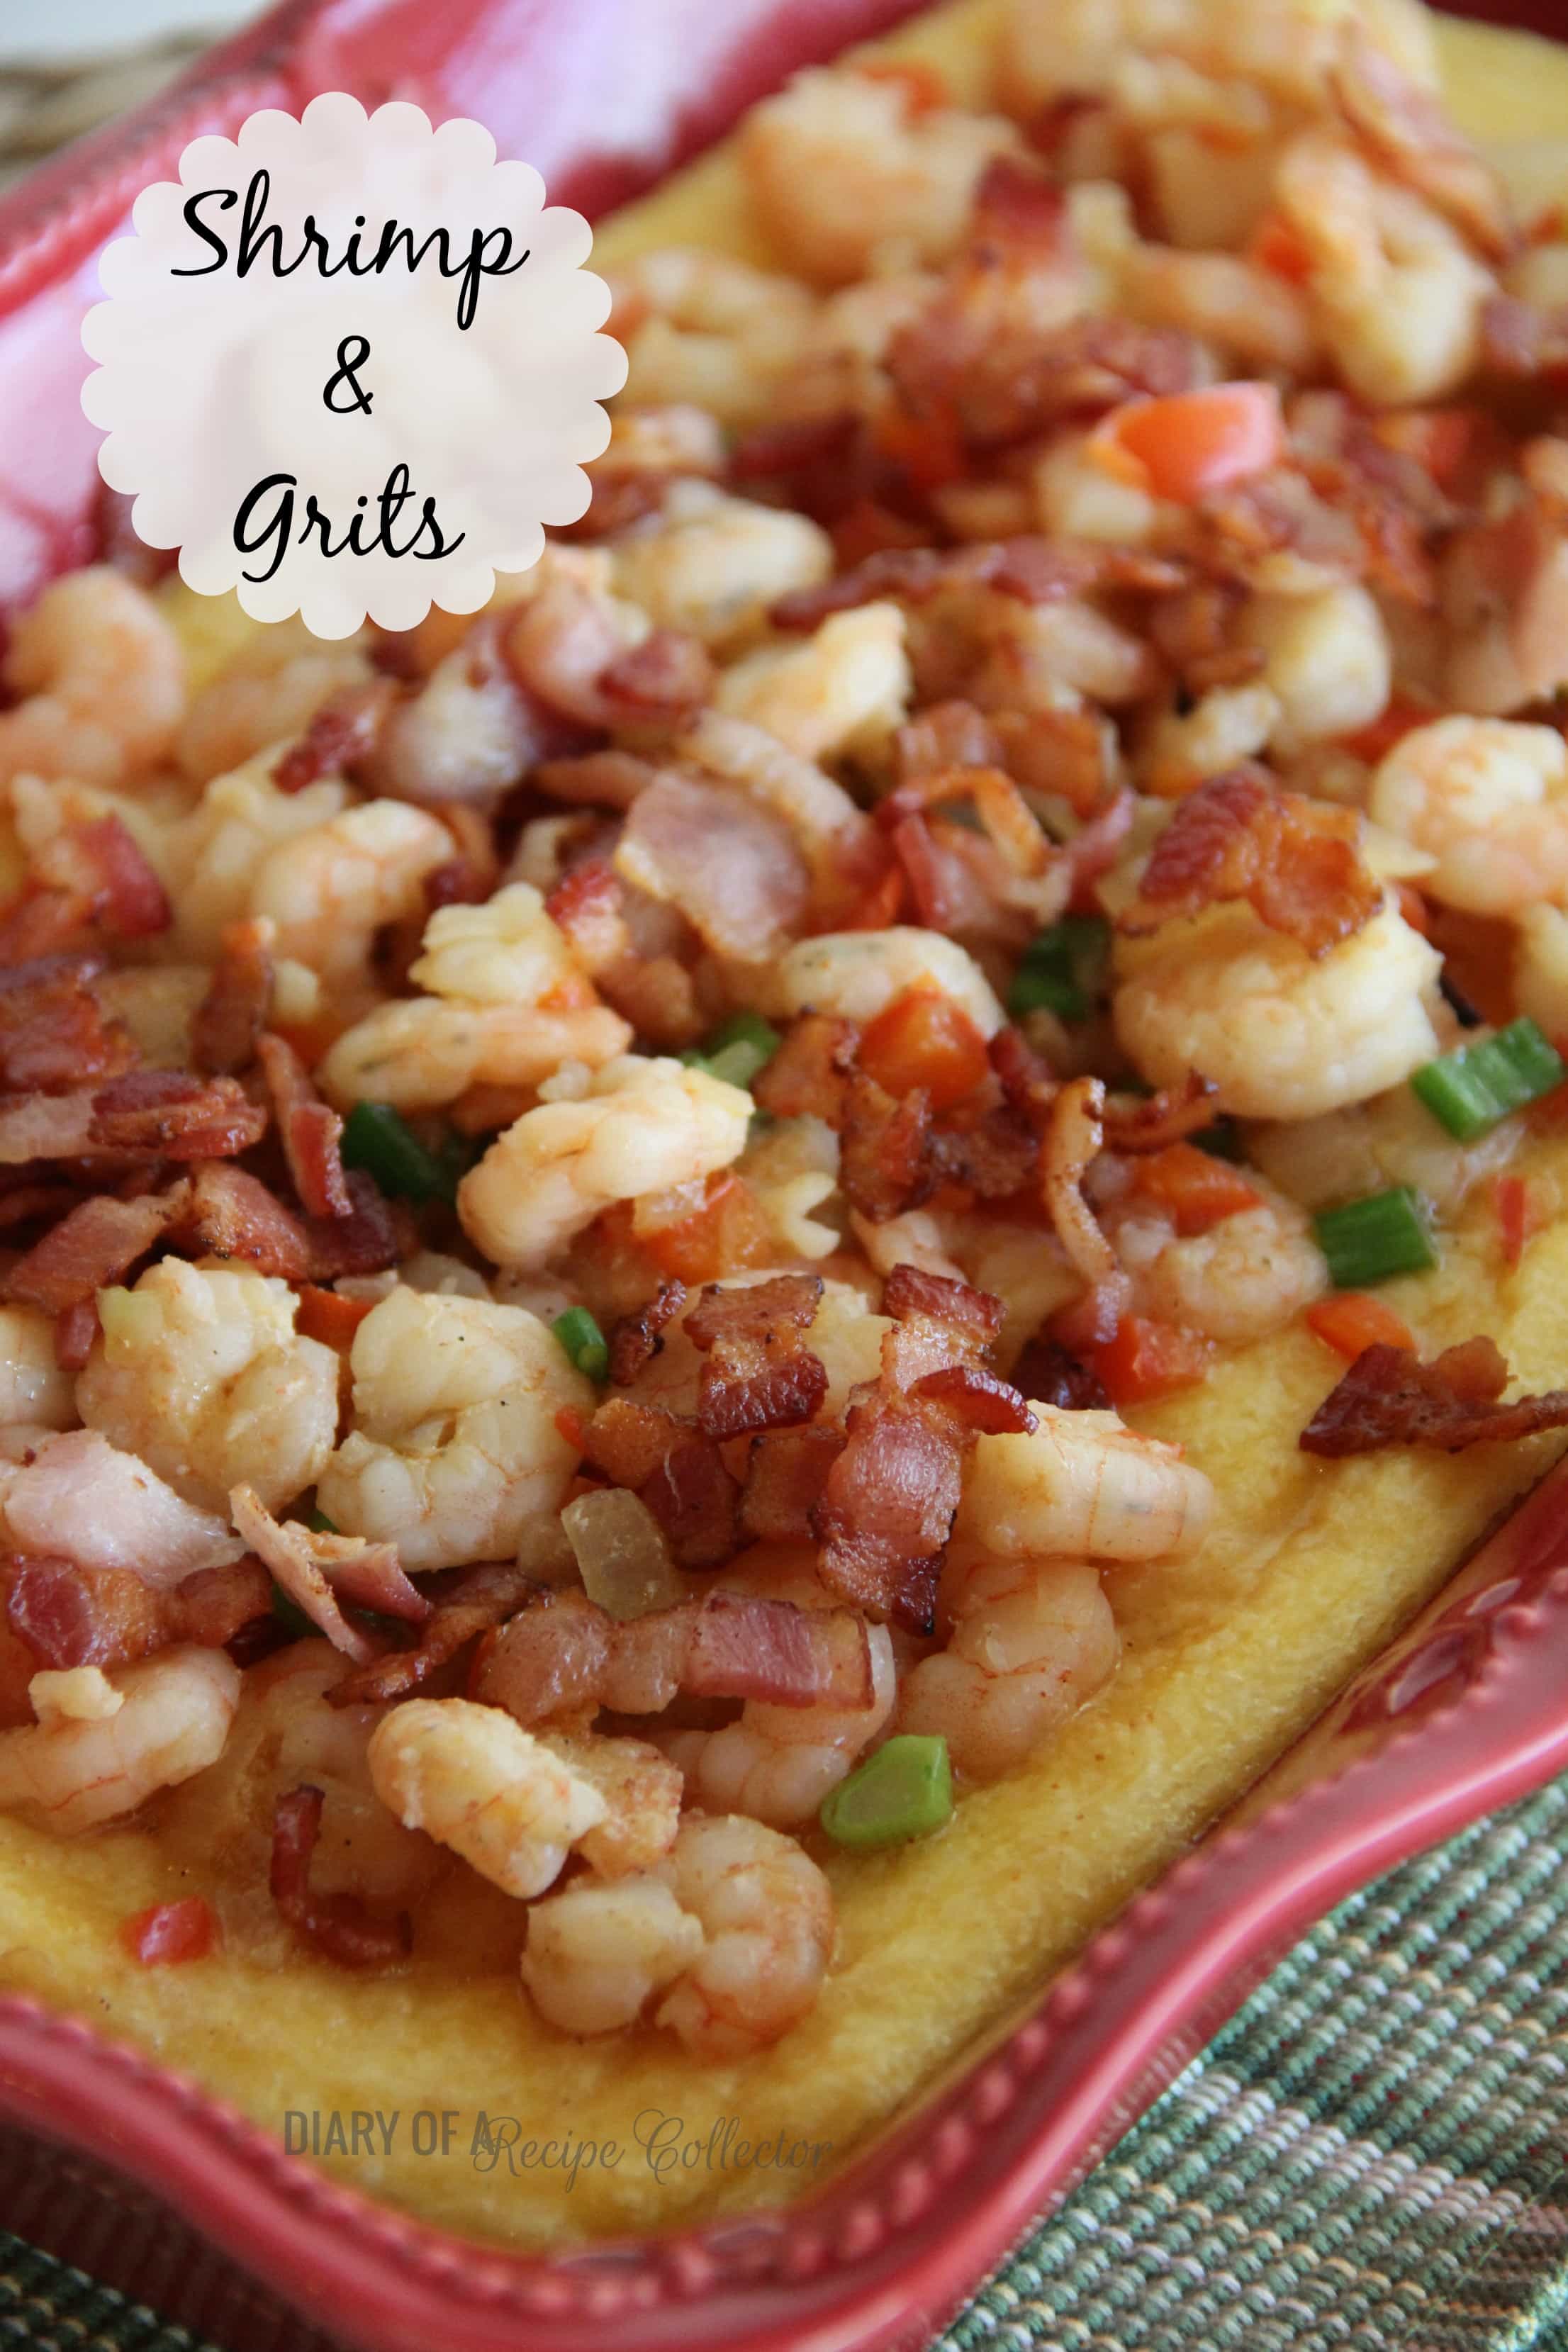 Shrimp & Grits - Diary of A Recipe Collector